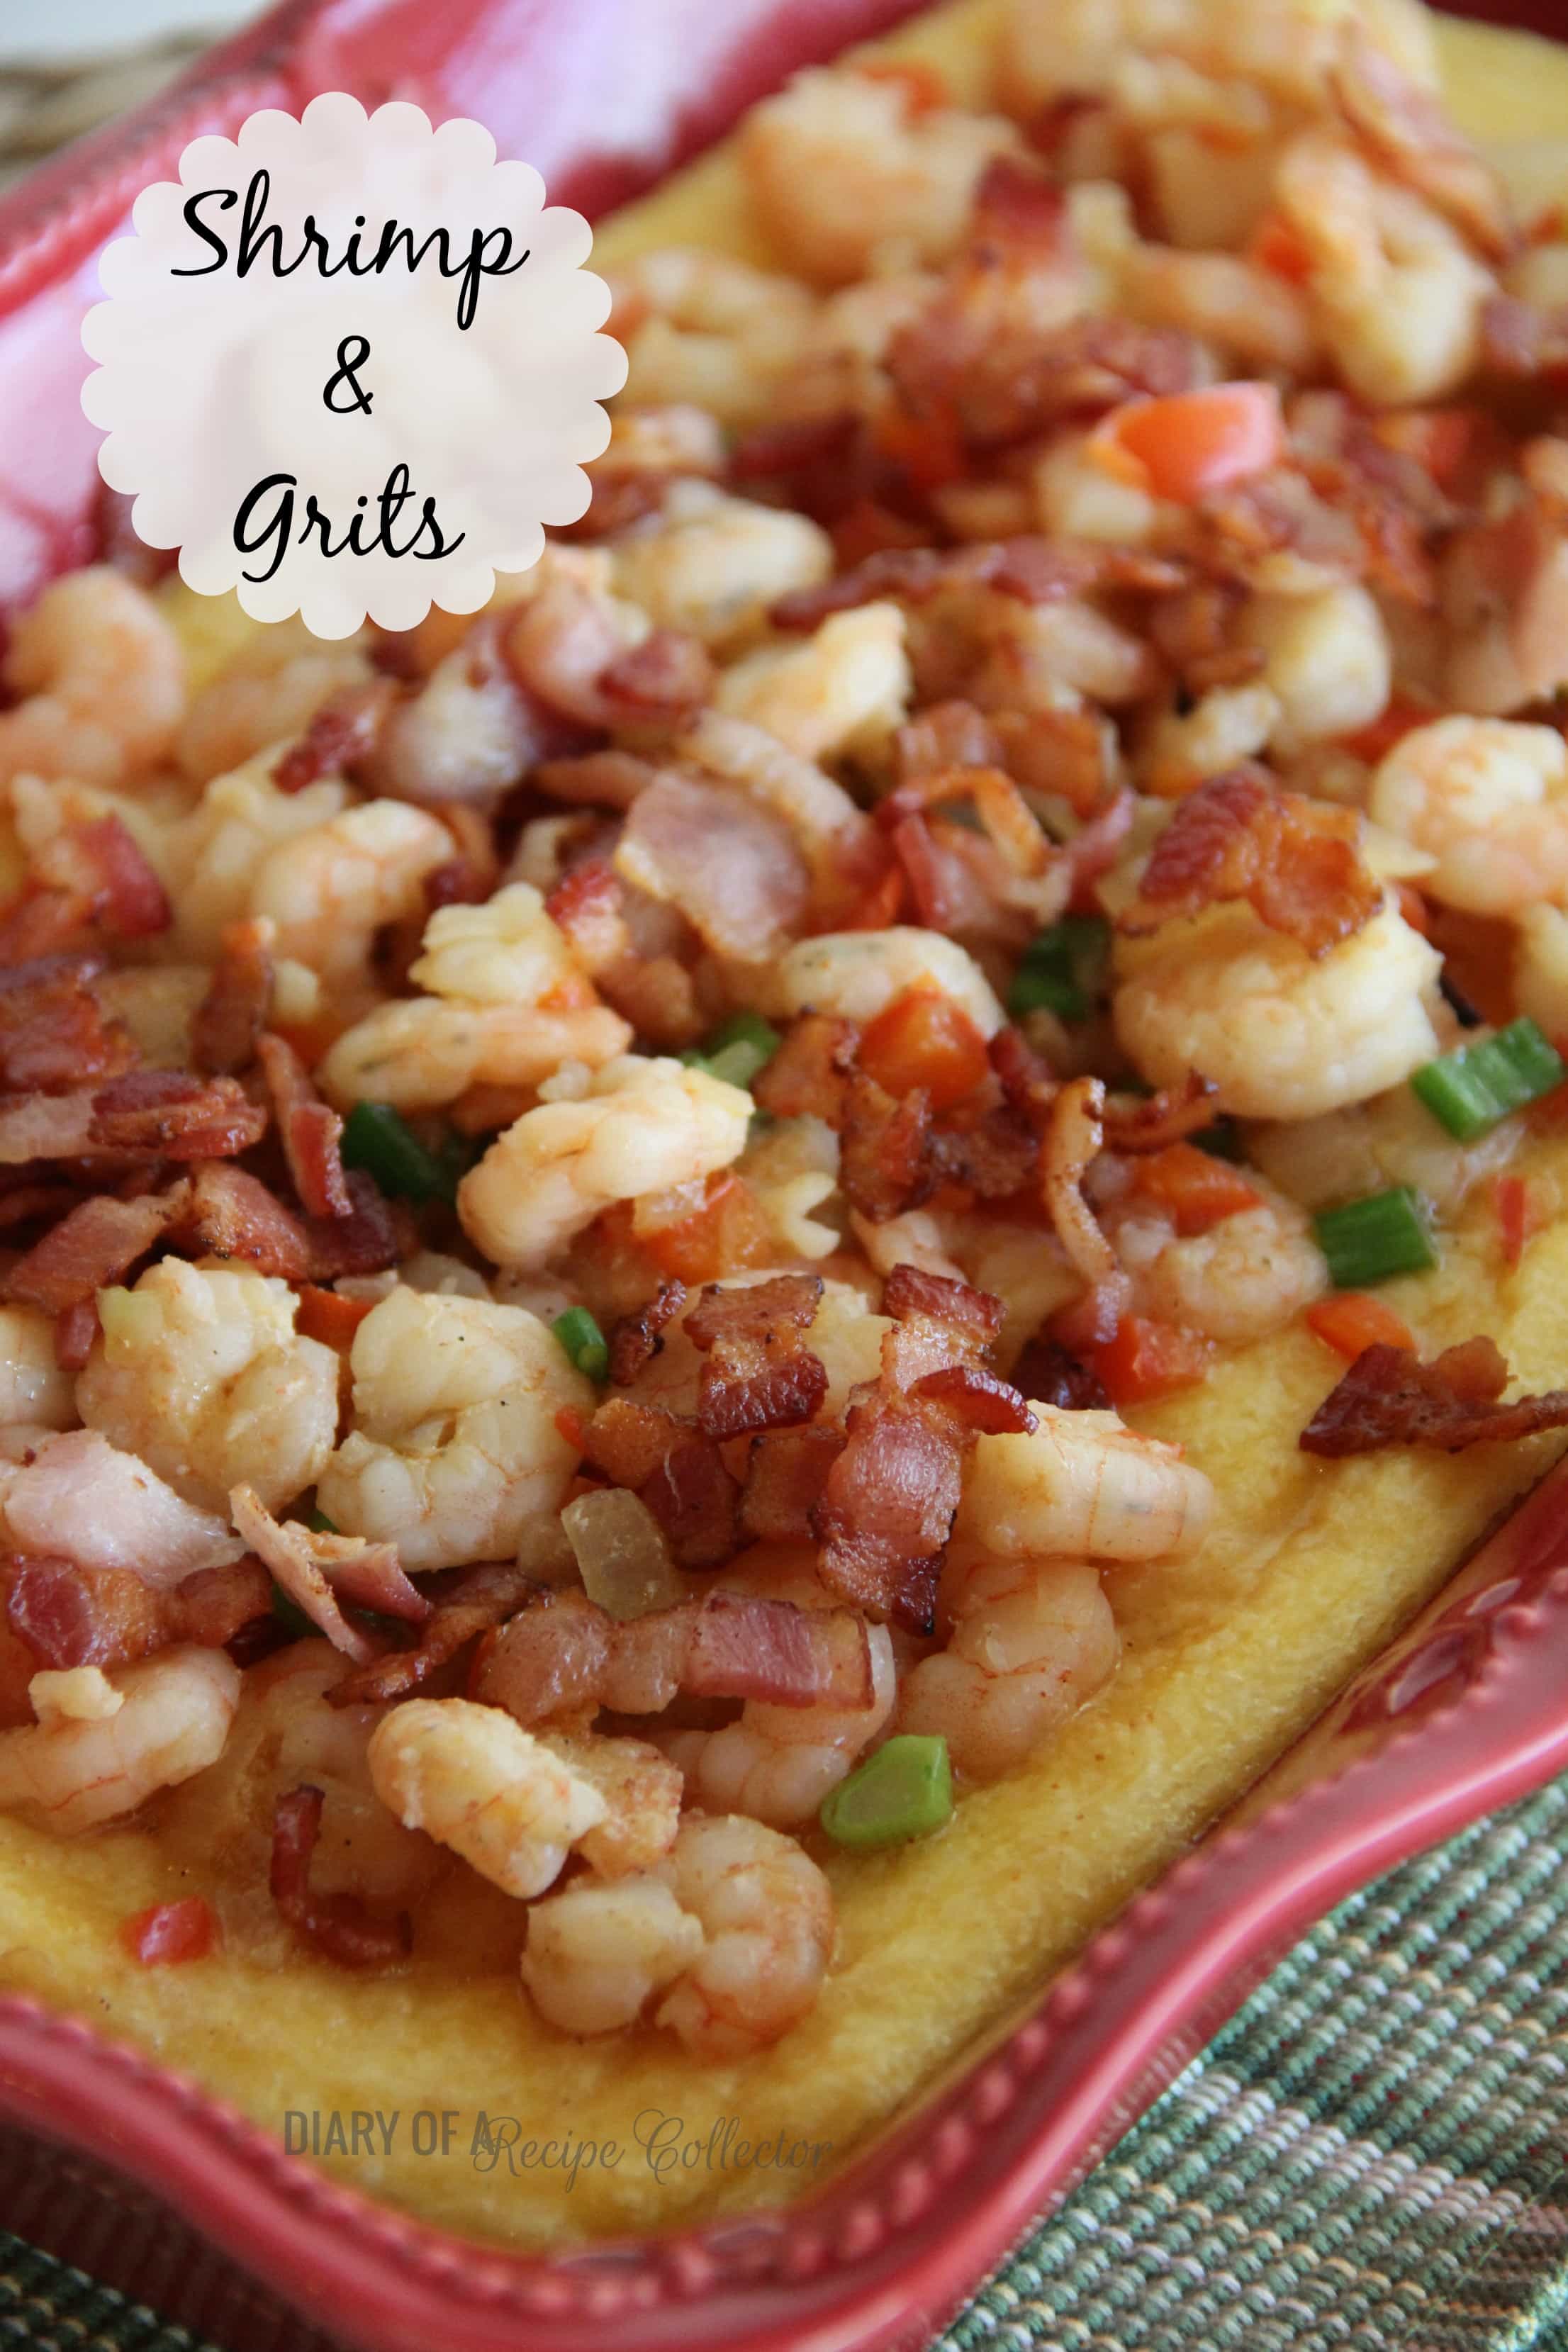 Shrimp & Grits - Diary of A Recipe Collector